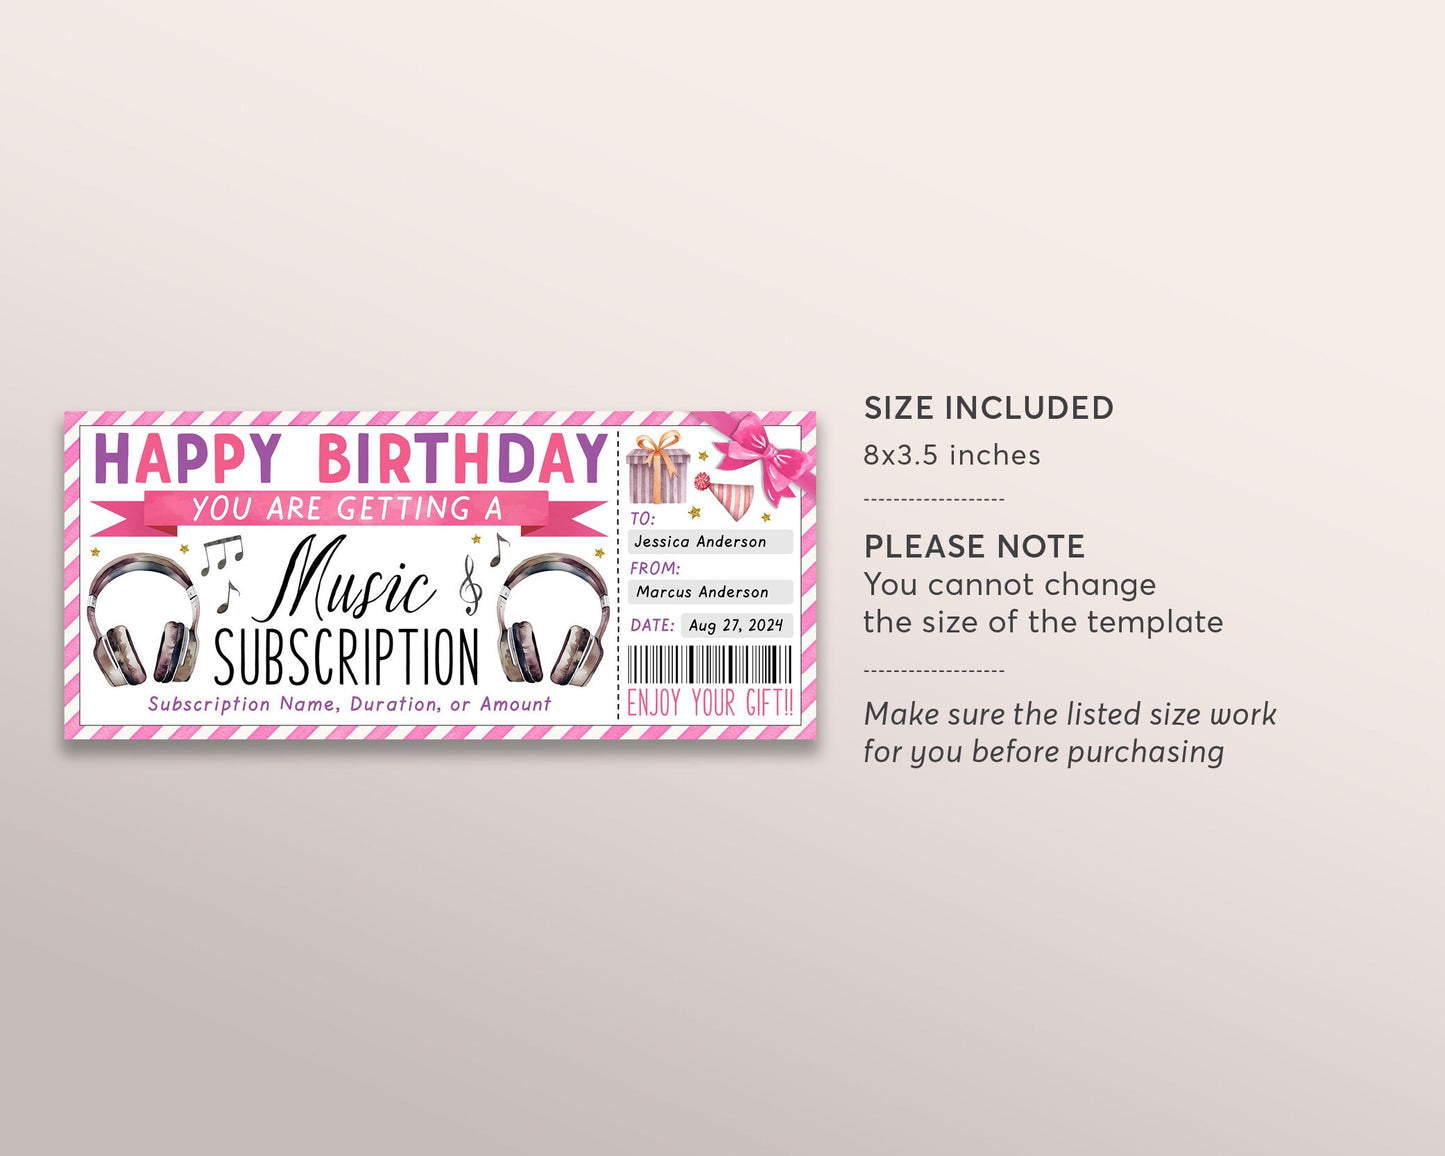 Music Subscription Gift Card Editable Template, Birthday Surprise Music Streaming Gift Certificate Voucher For Her, Coupon For Music Lovers